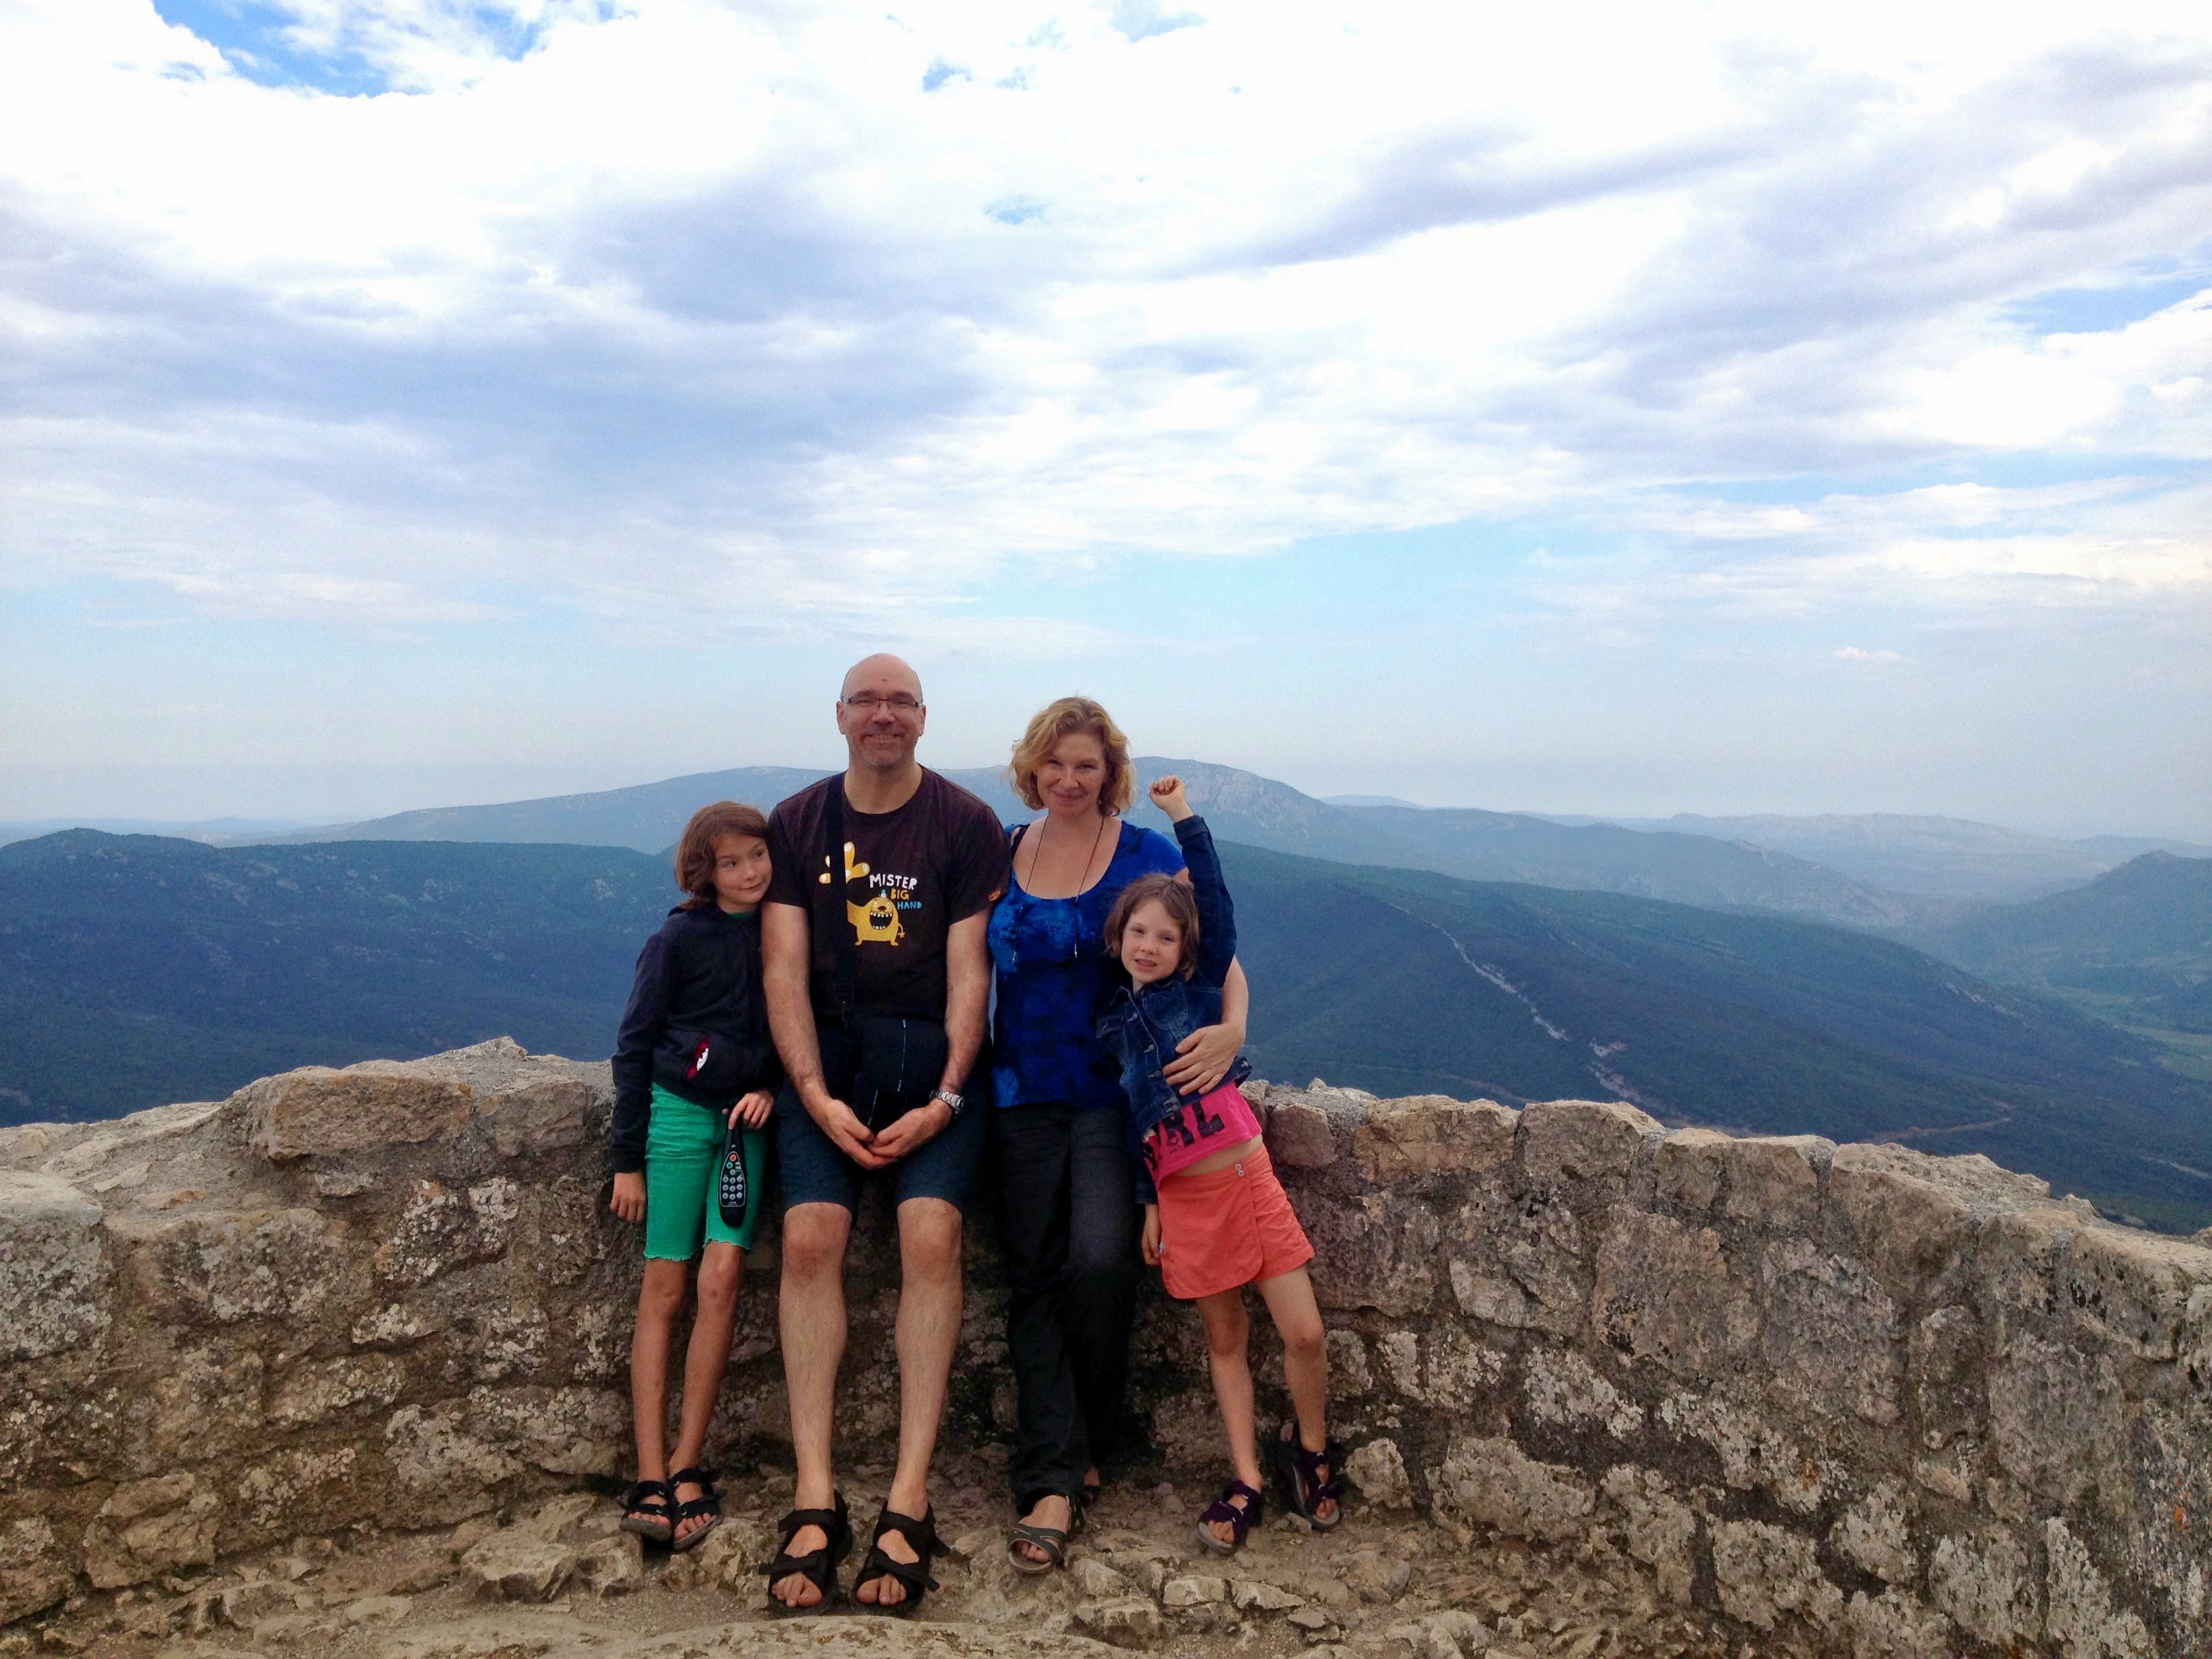 A family stand together at a viewpoint over looking the mountains.